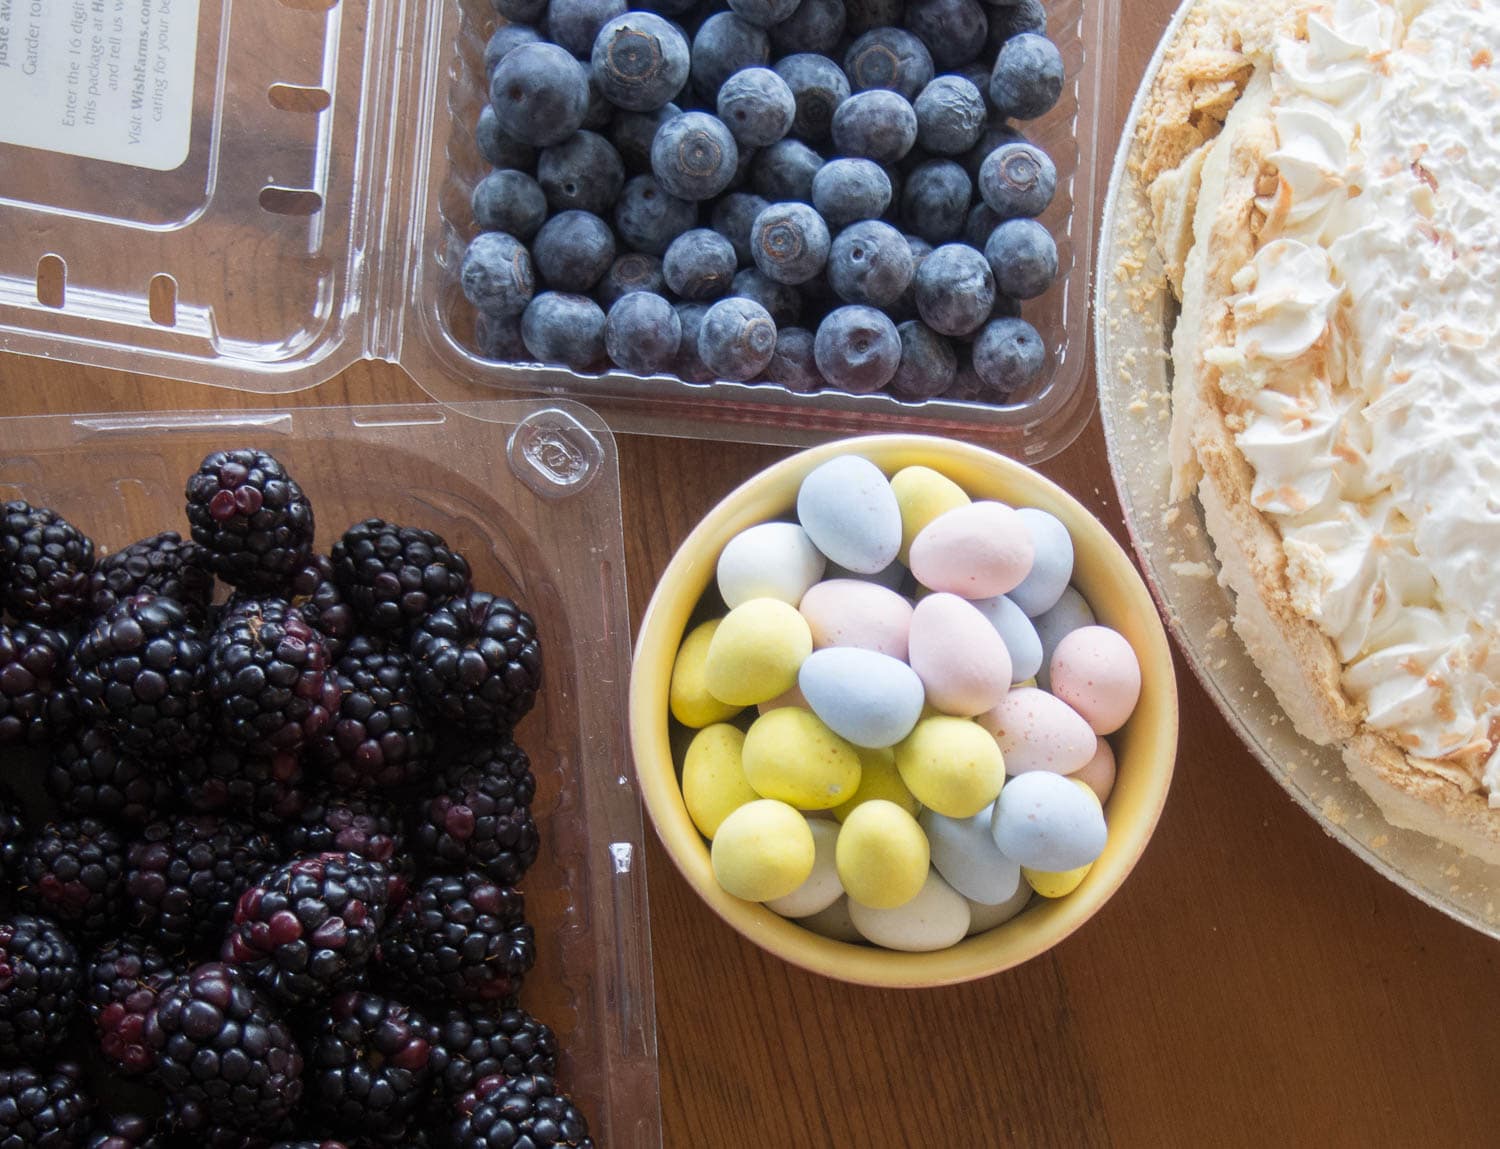 Make an easy Spring dessert by decorating a Coconut Cream Pie with fresh fruit and chocolate eggs.